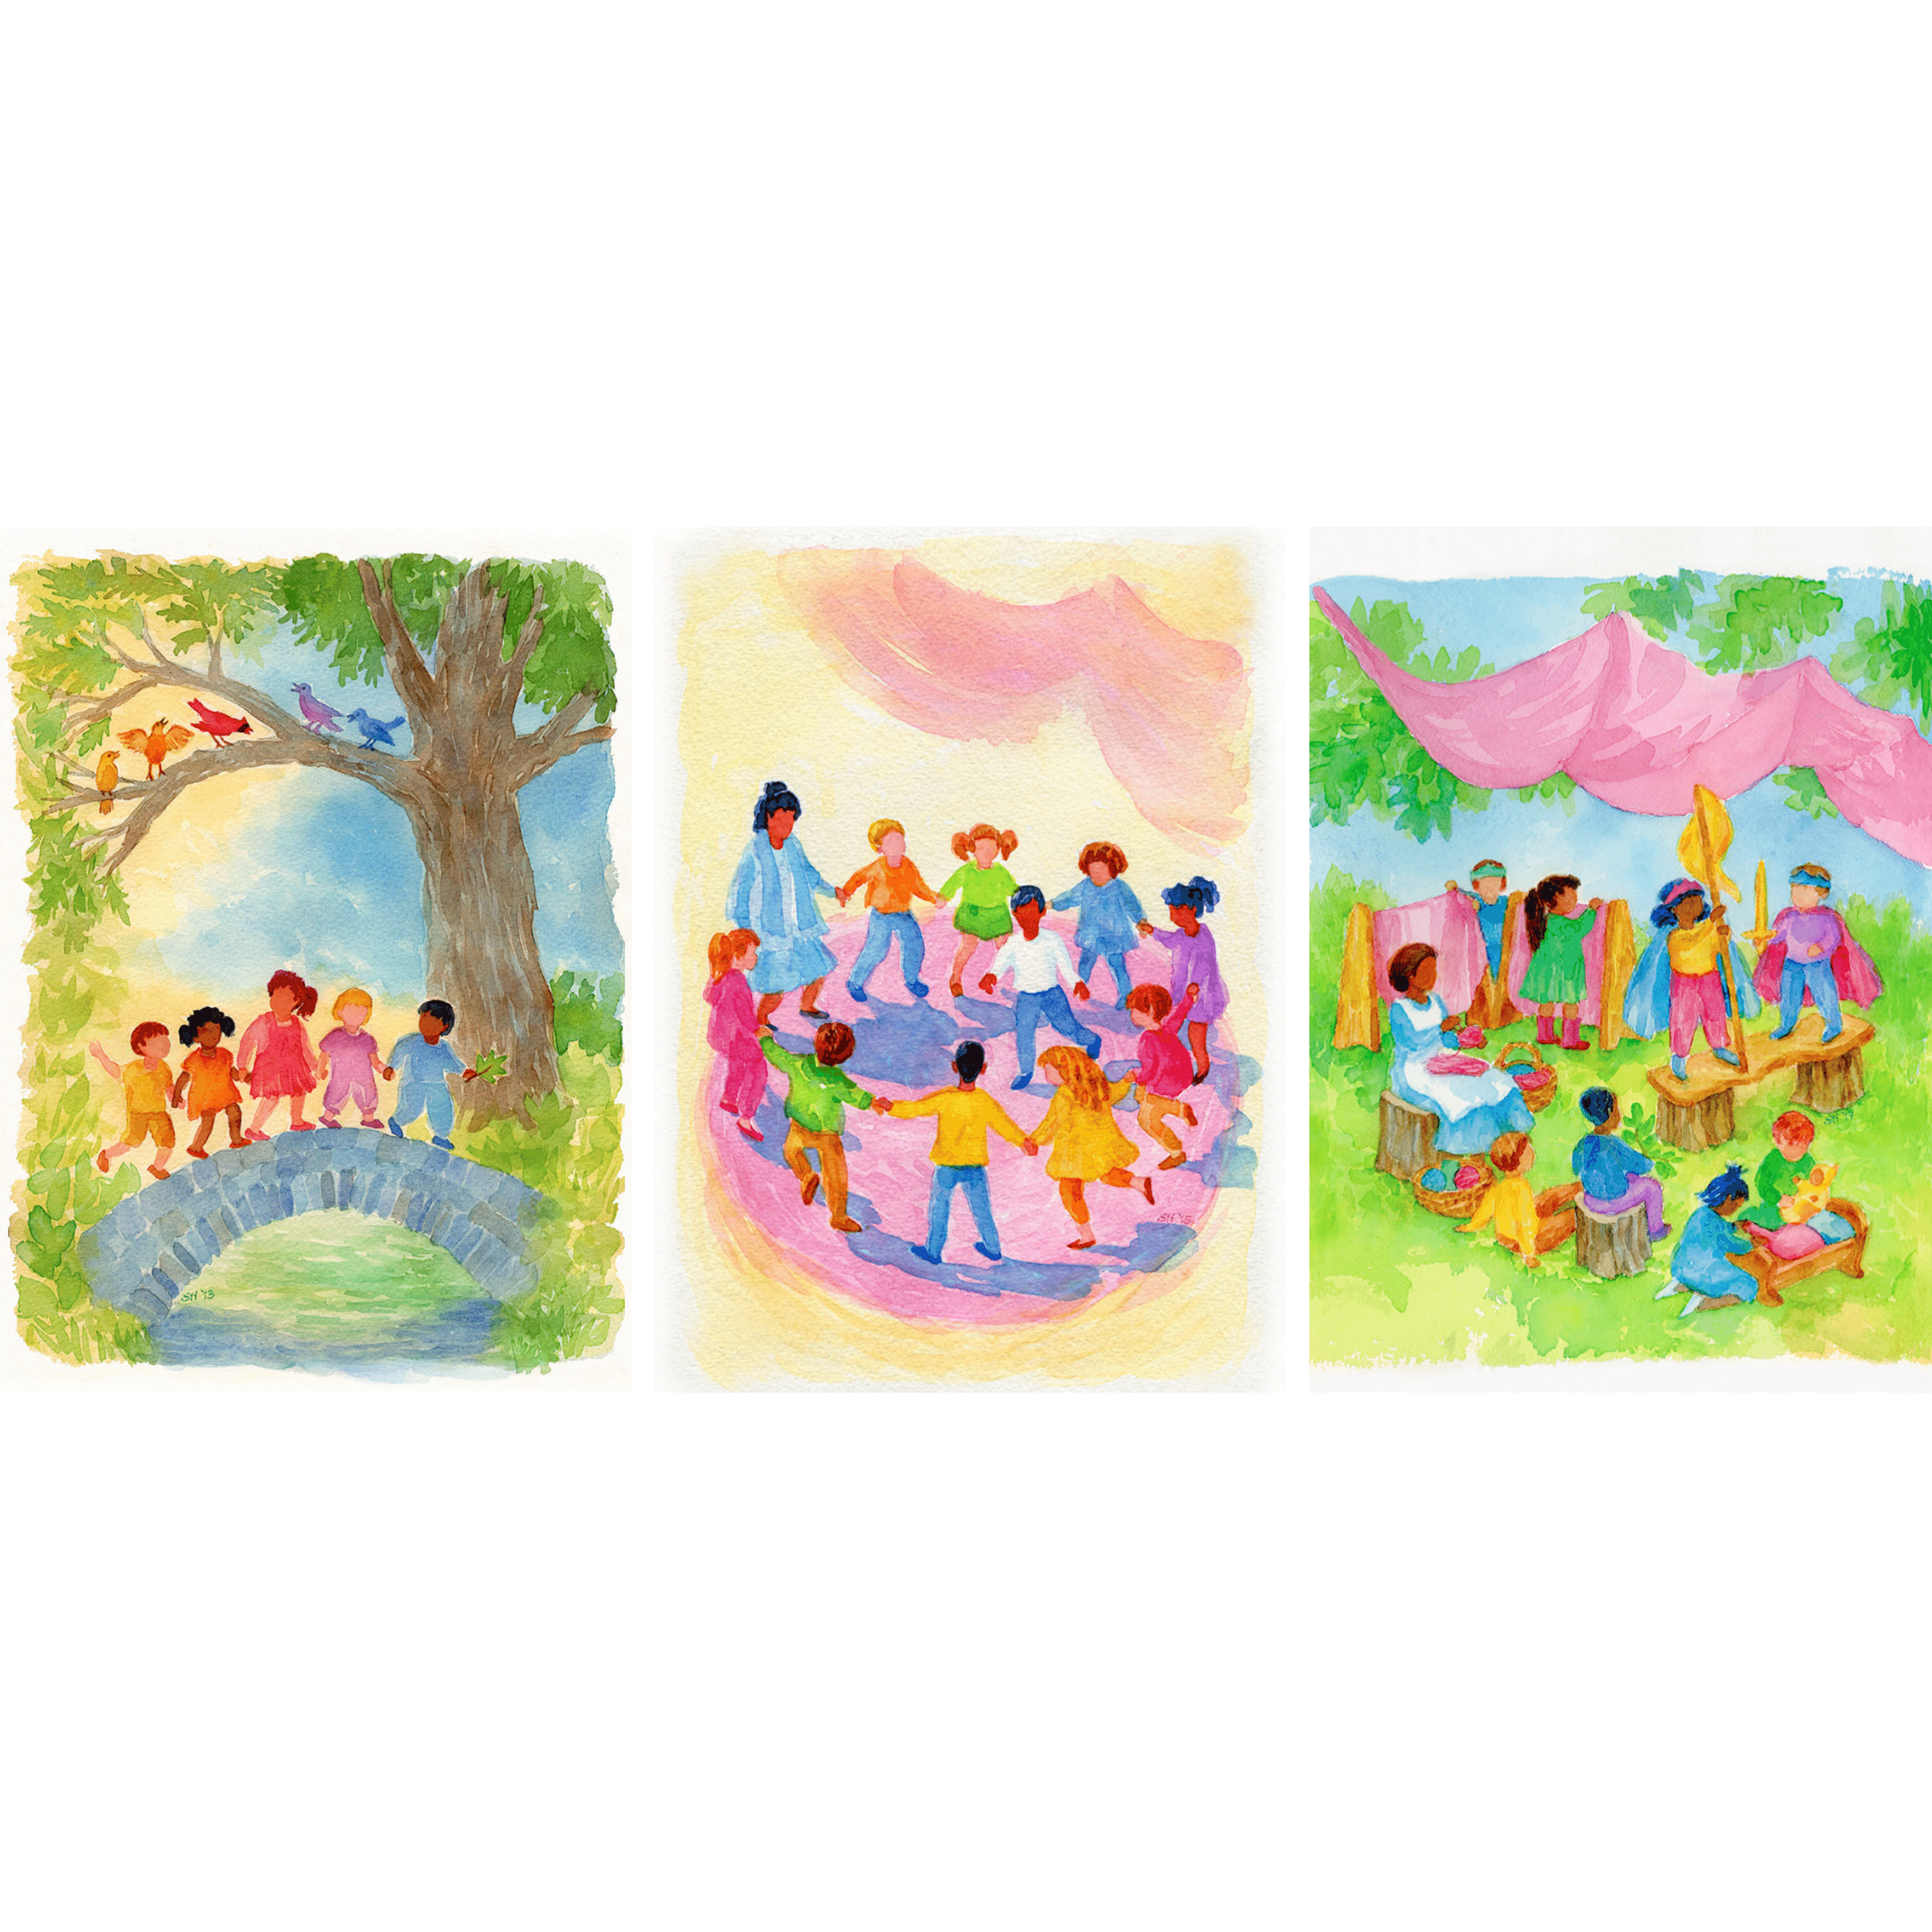 WECAN Cover Art Prints for Home and Classroom - Set of 3